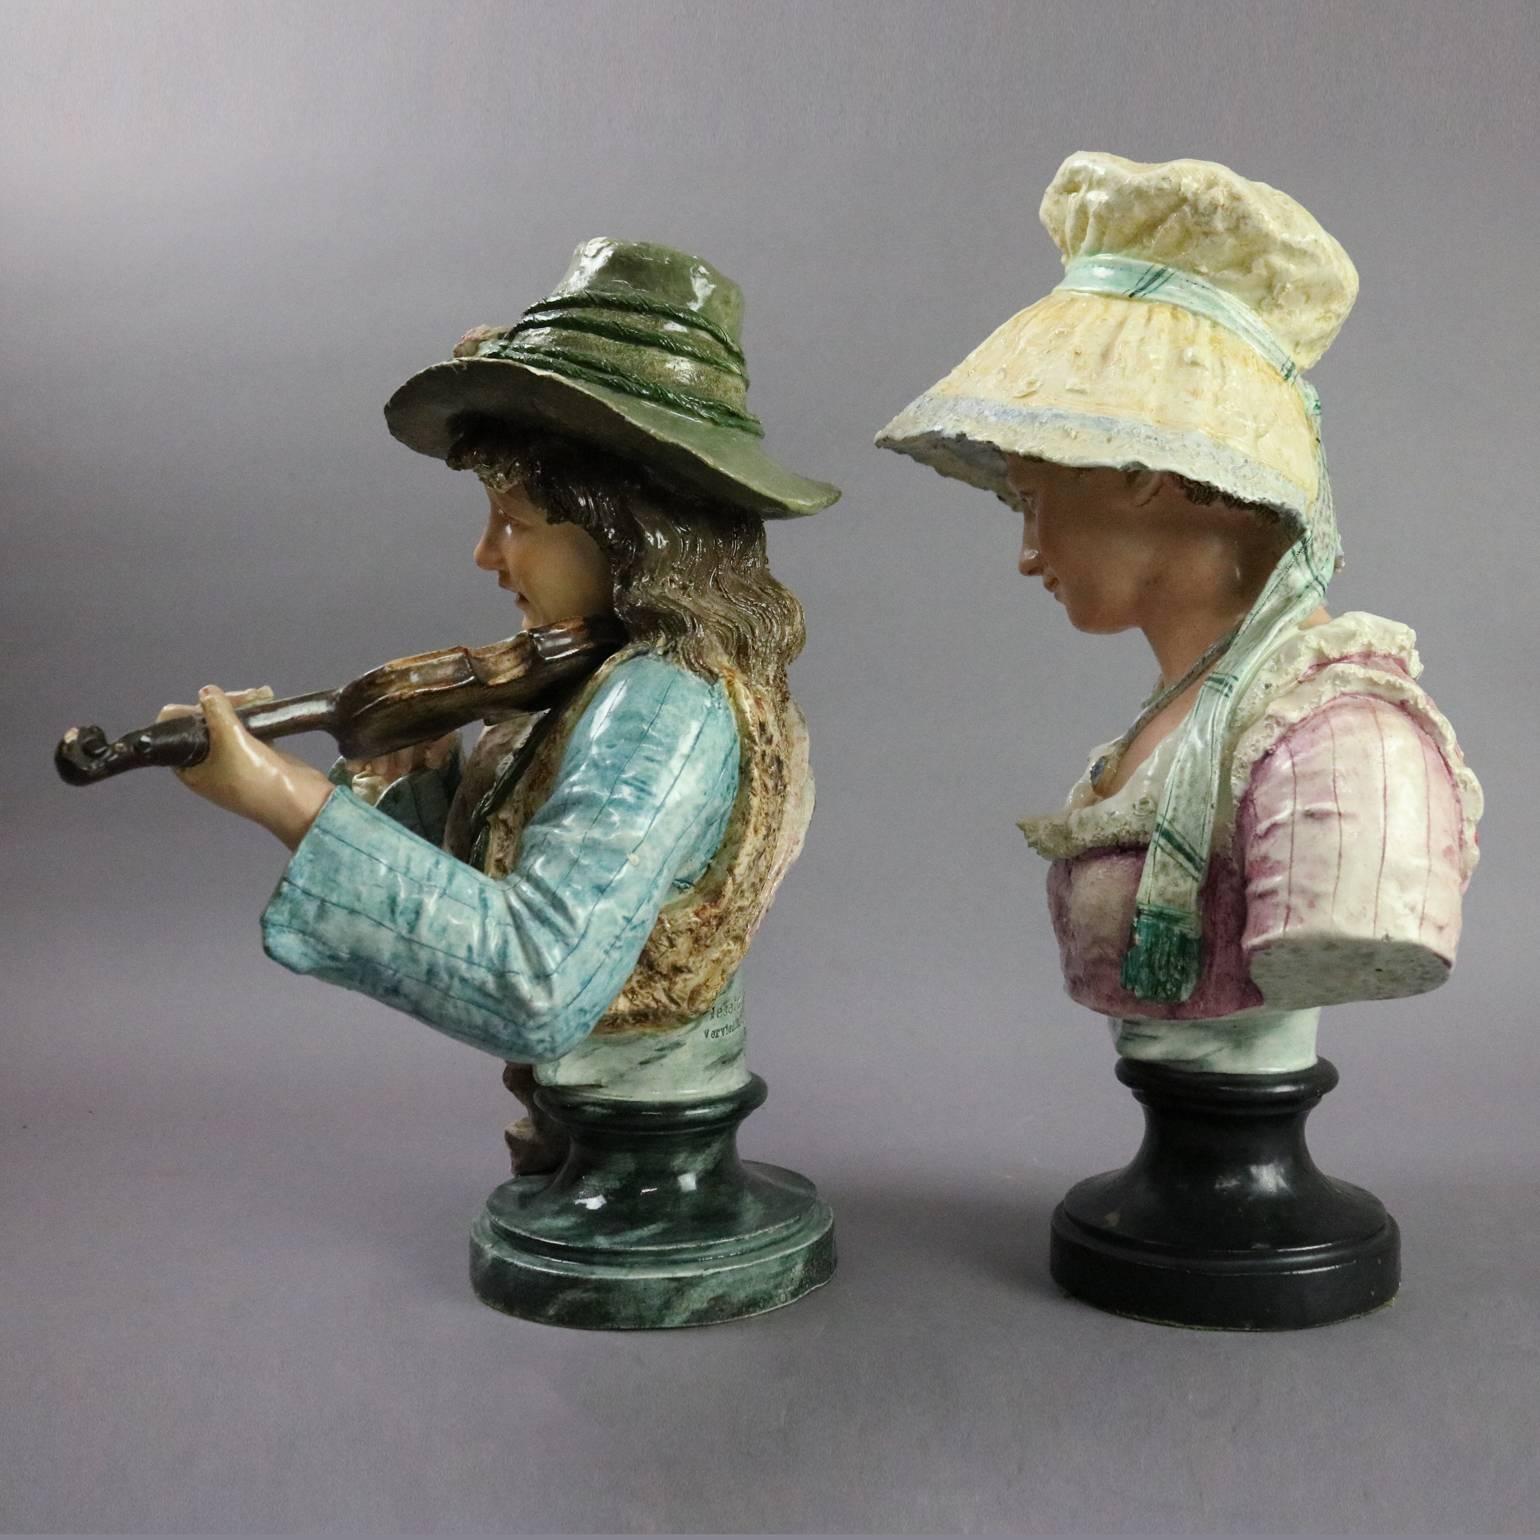 Pair of antique German Majolica earthenware pottery busts depict young woman wearing bonnet and young man musician playing violin, "Gesetzlich Geschutzt Vorbehalten 565 66" on pedestal on man, "536 70" on pedestal of woman, circa